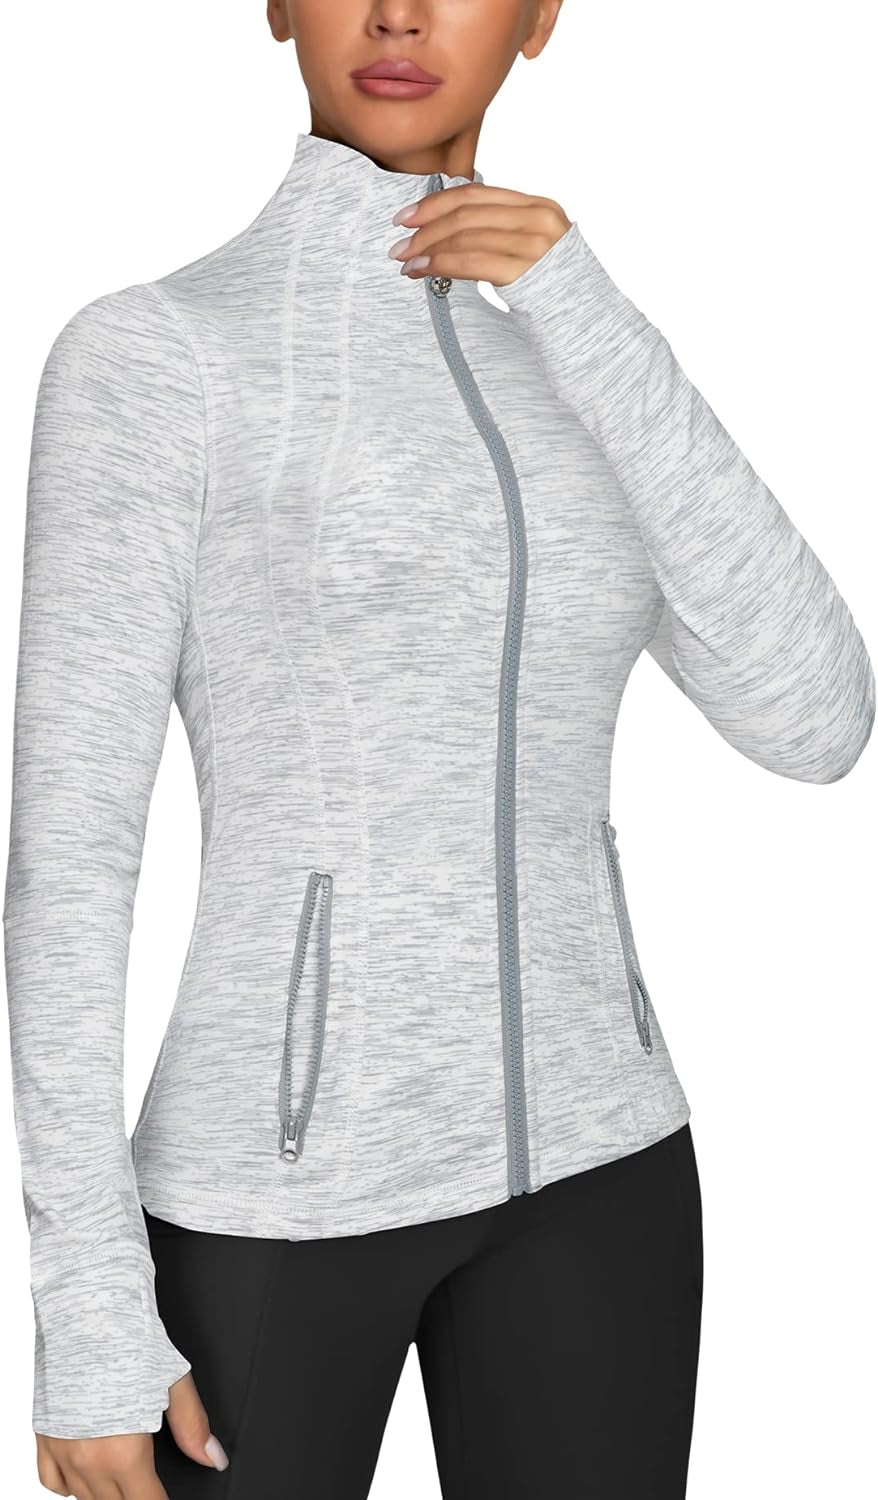 "Enhance Your Comfort and Style with our Women's Lightweight Cotton Running Jacket - Ideal for Gym, Yoga, and Athleisure Wear!"